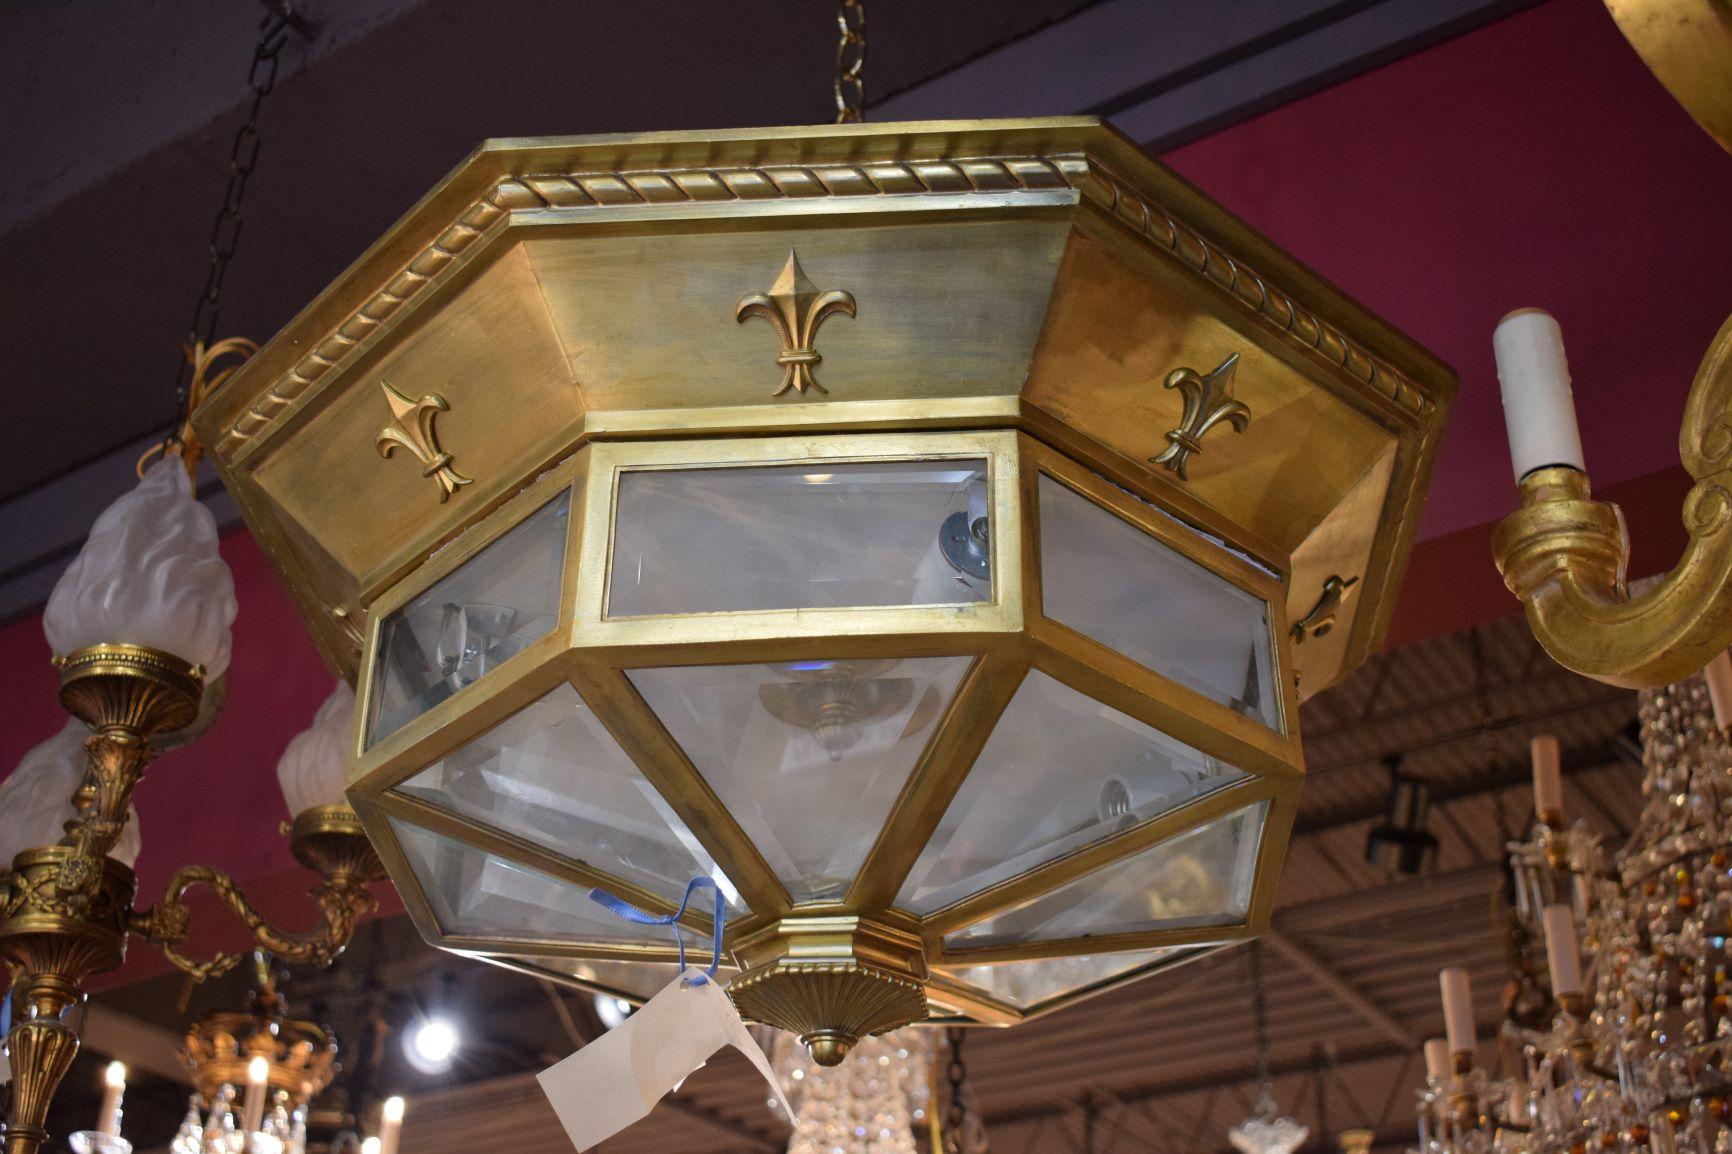 A very fine Art Deco flushmounted pendant (Plafonnier). Gilt bronze with beveled crystal panels.
France, circa 1935. 5-light. Several available.
Dimensions: Height 13 1/2